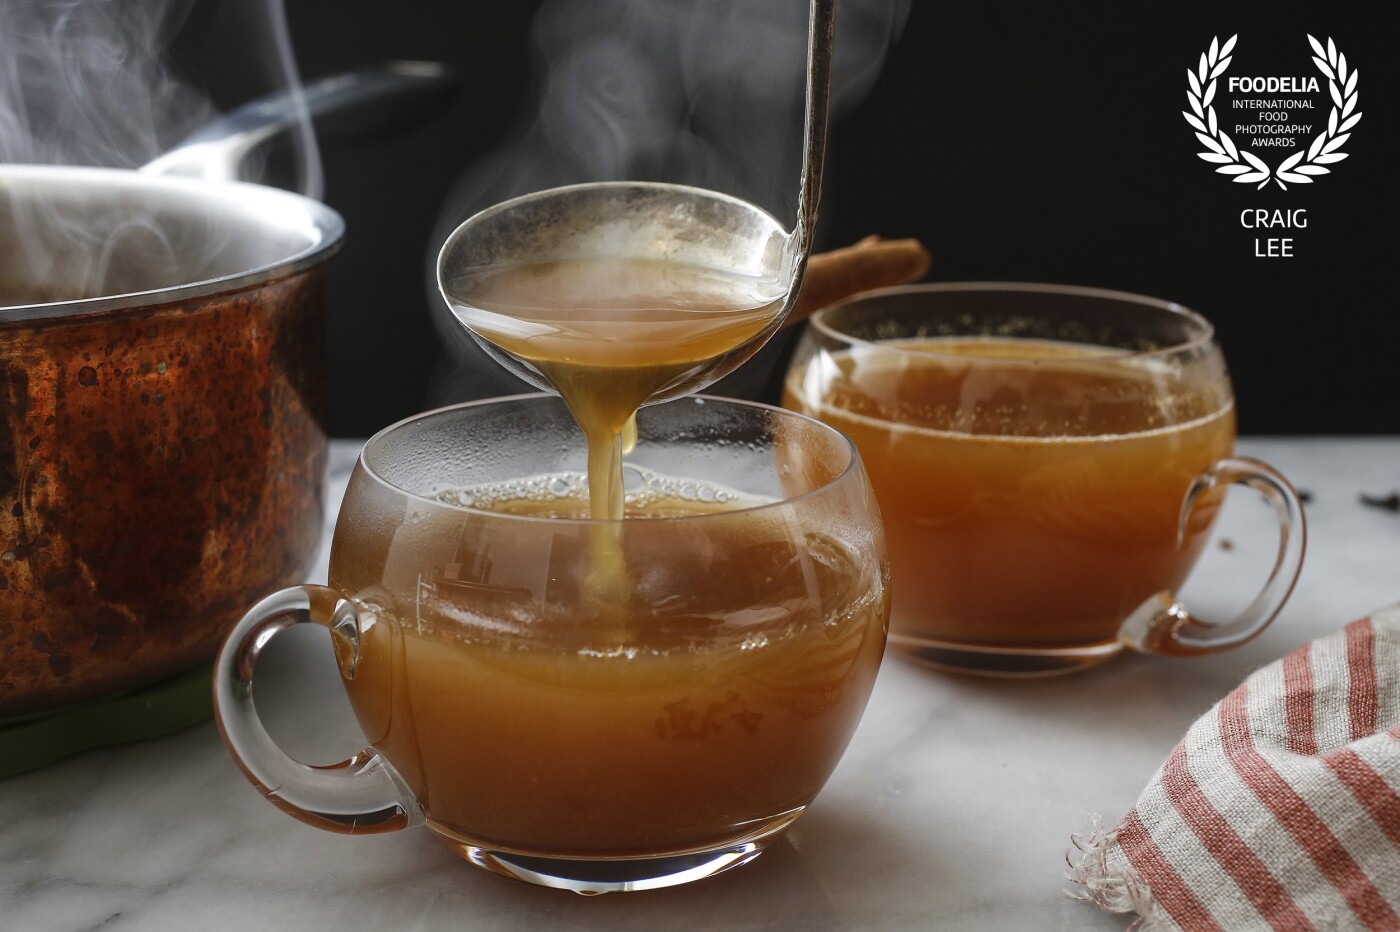 Cozy Cider recipe by Jacques Pepin photographed for the New York Times. Jacques Pepin's version of hot apple cider with bourbon or rum added as optional. Great for a winter day or the holidays. Styled by @the_bojon_gourmet and @snixykitchen.